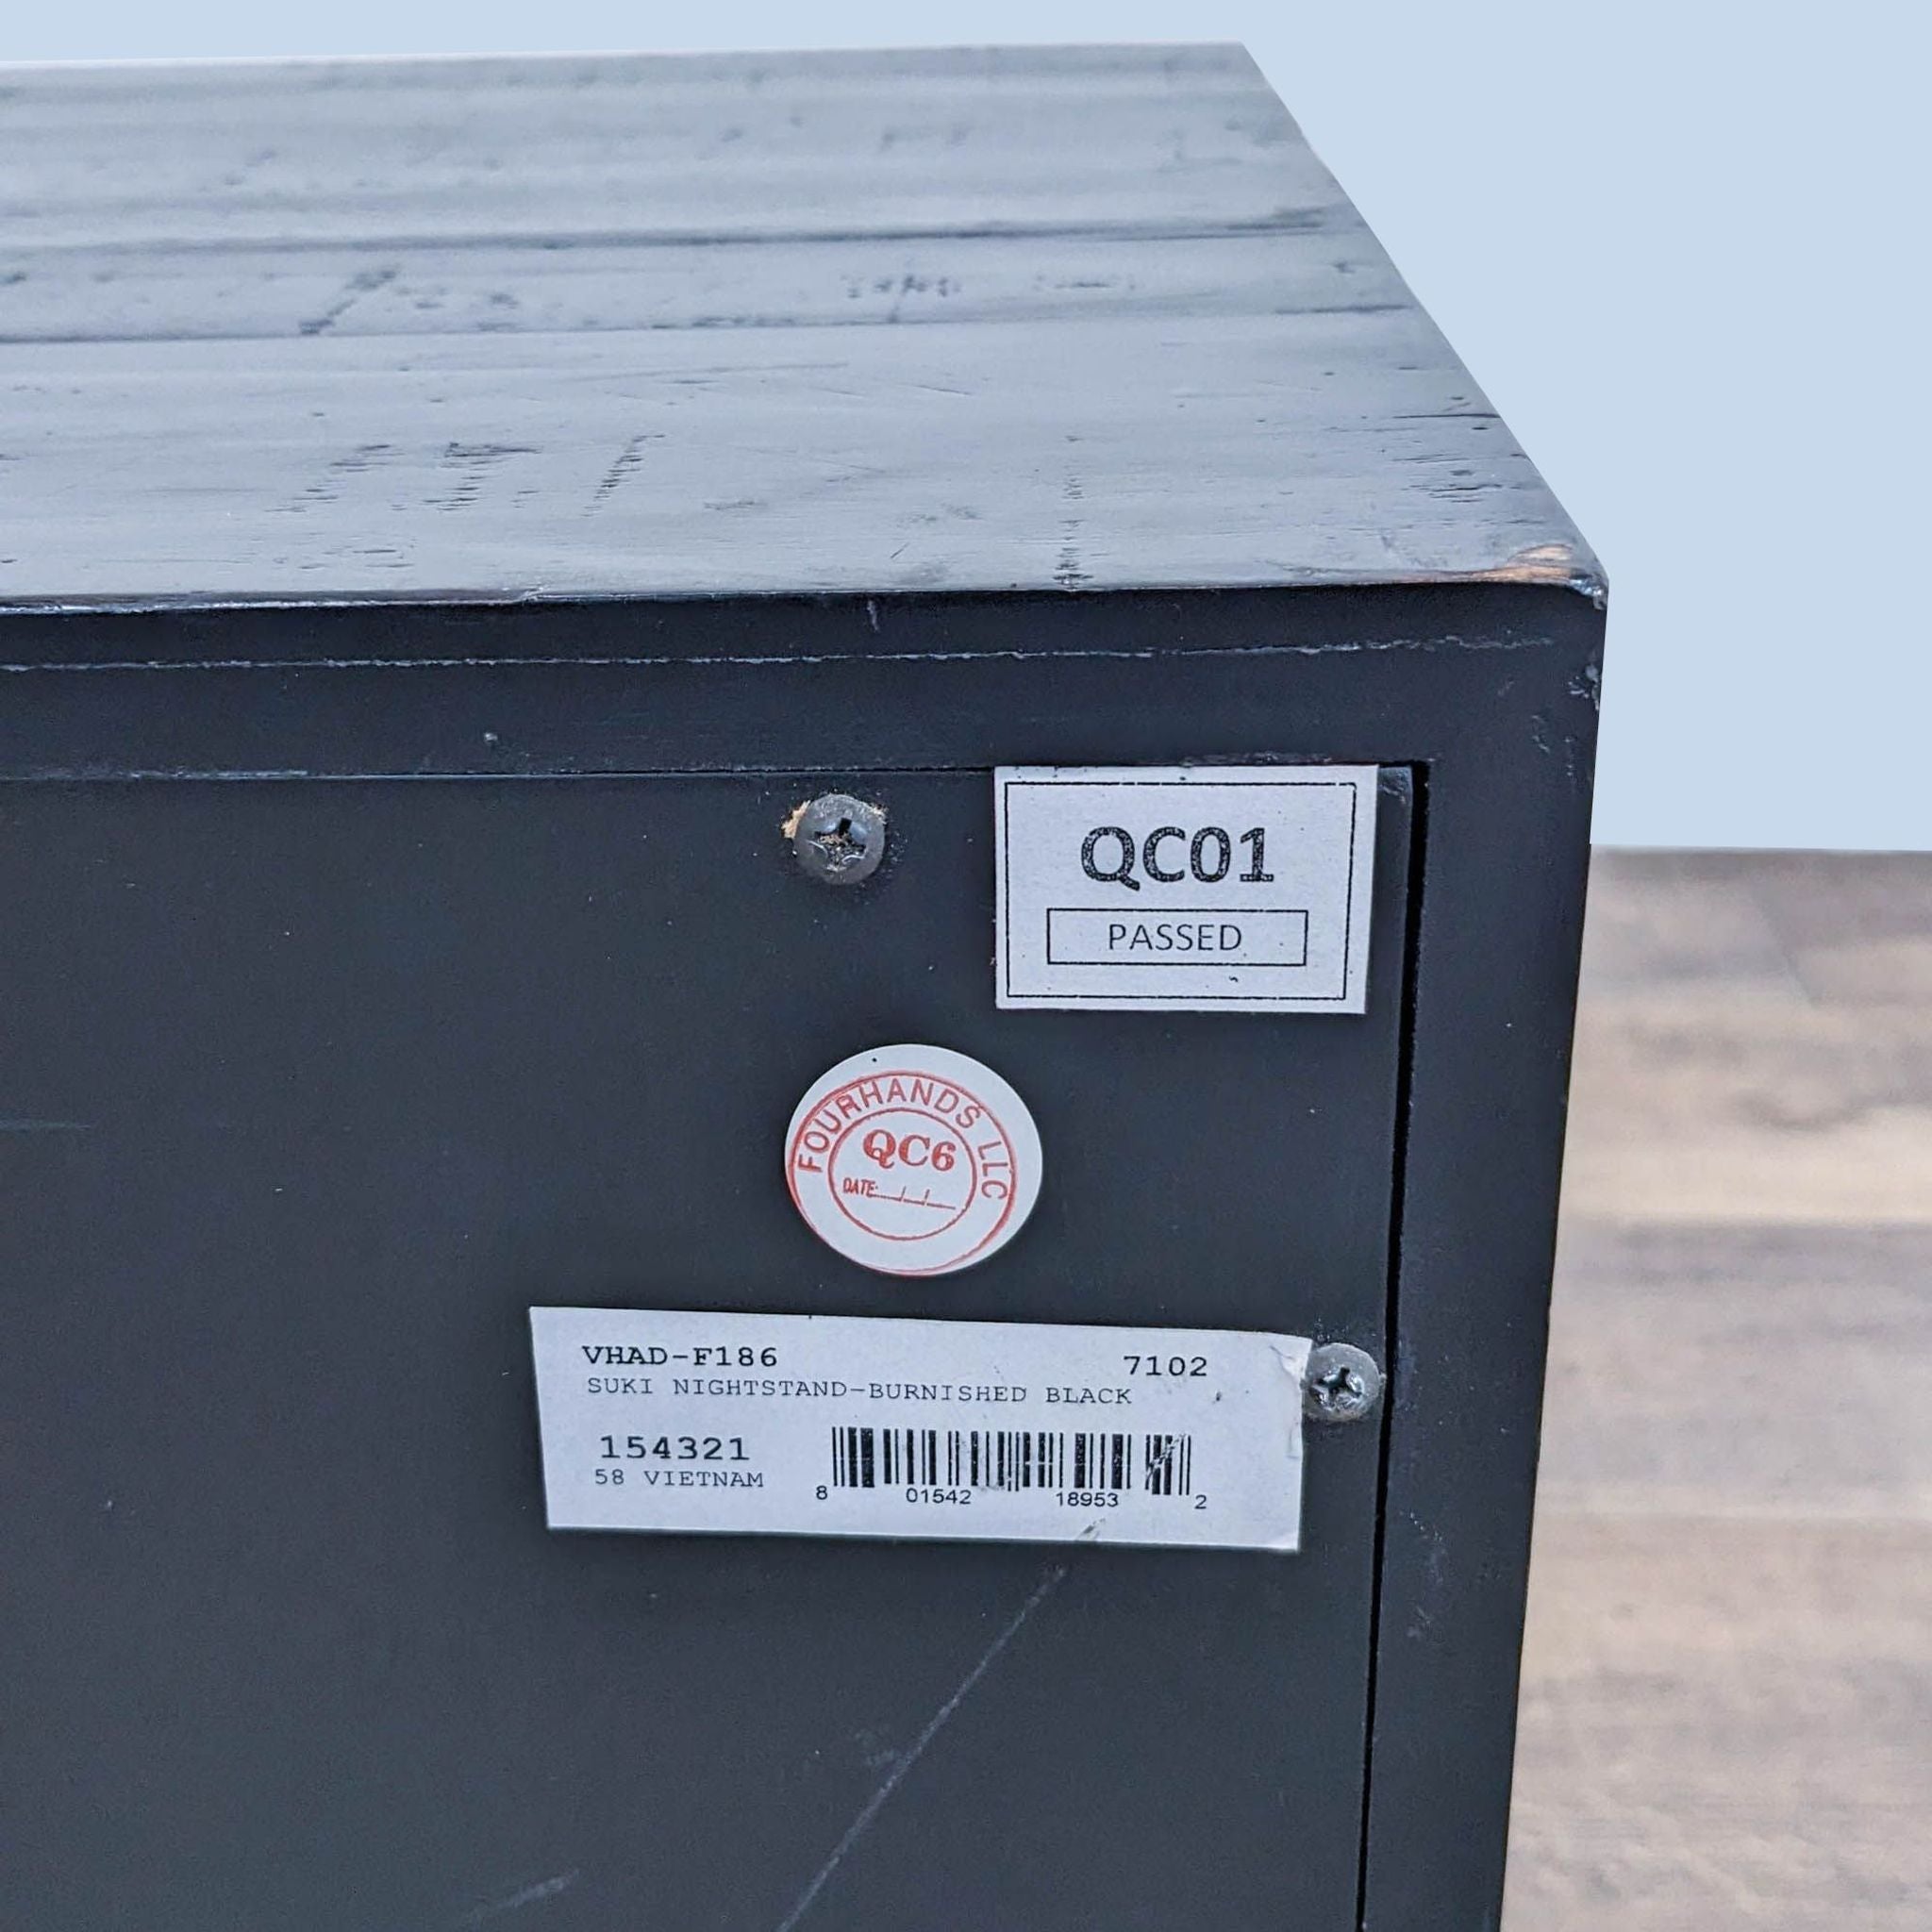 Back view of a Four Hands acacia wood end table showing quality control stickers and a barcode, indicating a burnished black finish and brass hardware.